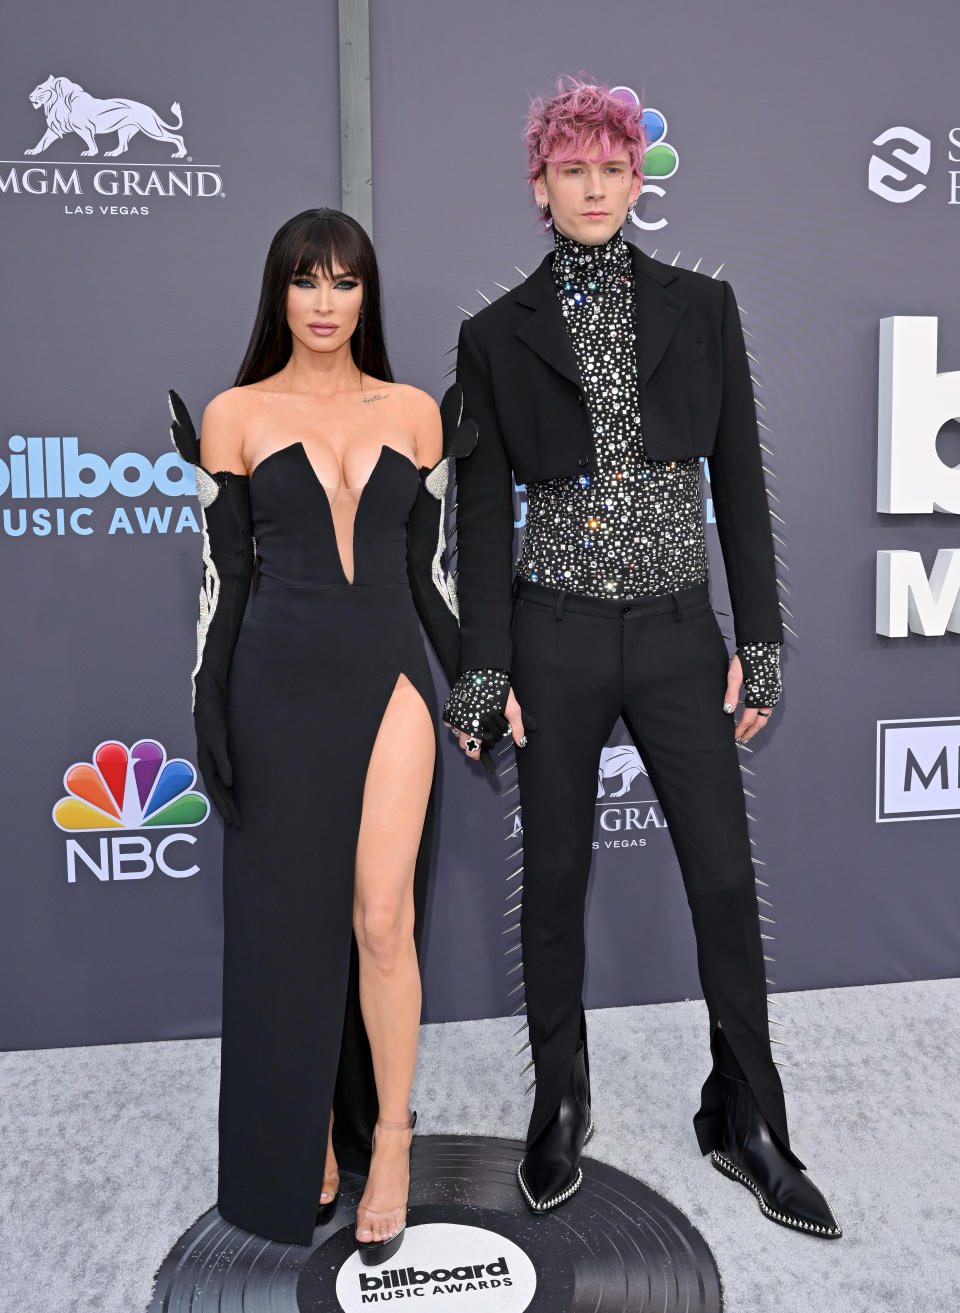 Megan Fox wears a black strapless gown with a thigh-high slit next to Machine Gun Kelly who wears a studdent cropped jacket and trousers with a sequin shirt on the 2022 Billboard Music Awards red carpet. (Getty Images)